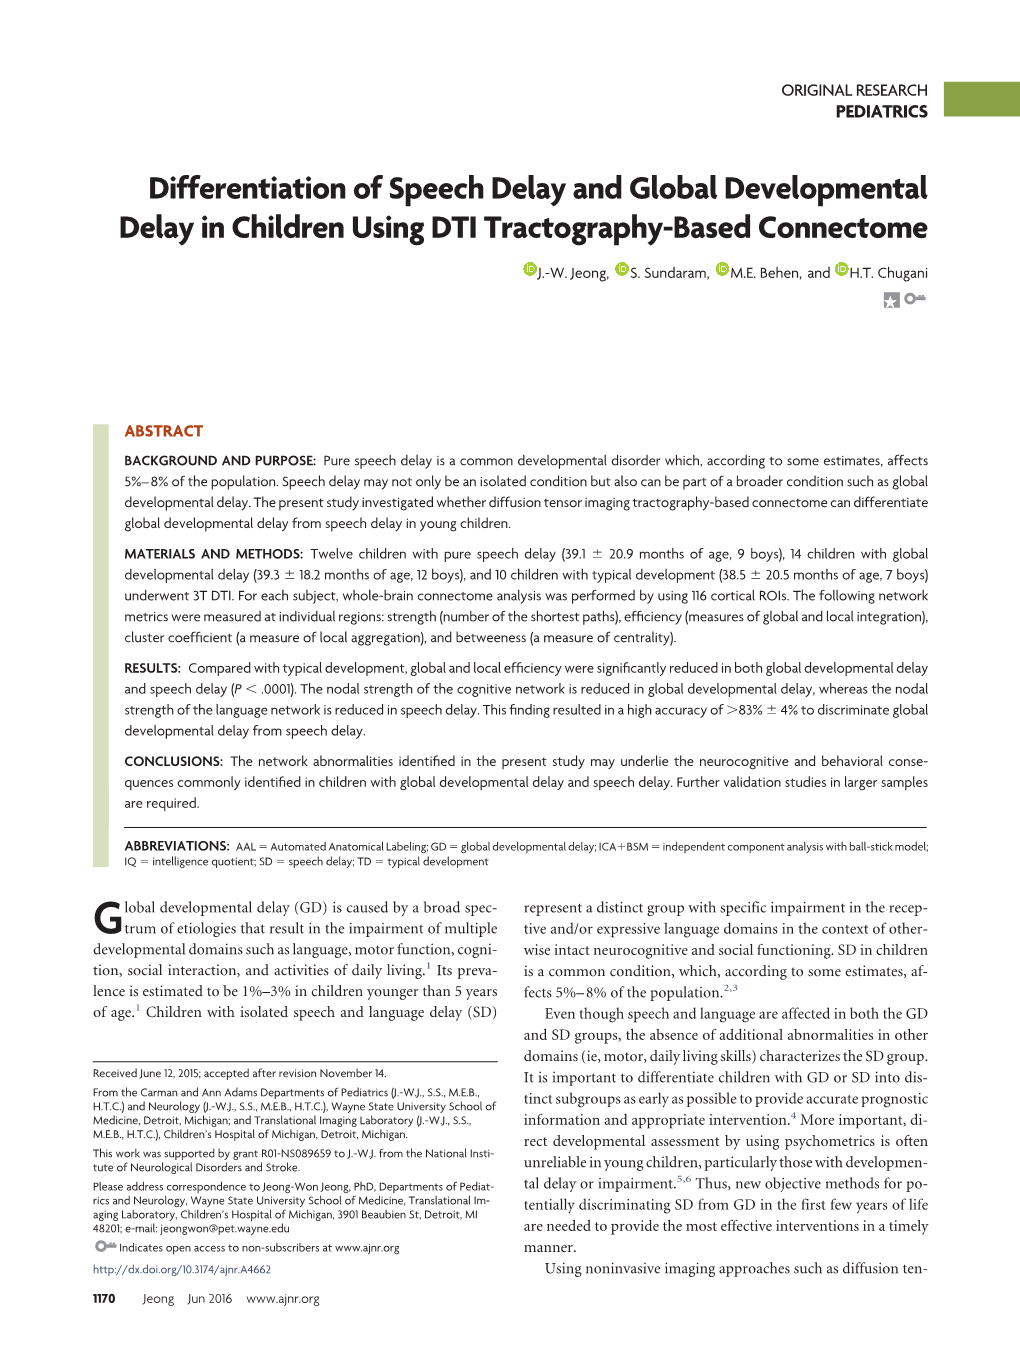 Differentiation of Speech Delay and Global Developmental Delay in Children Using DTI Tractography-Based Connectome